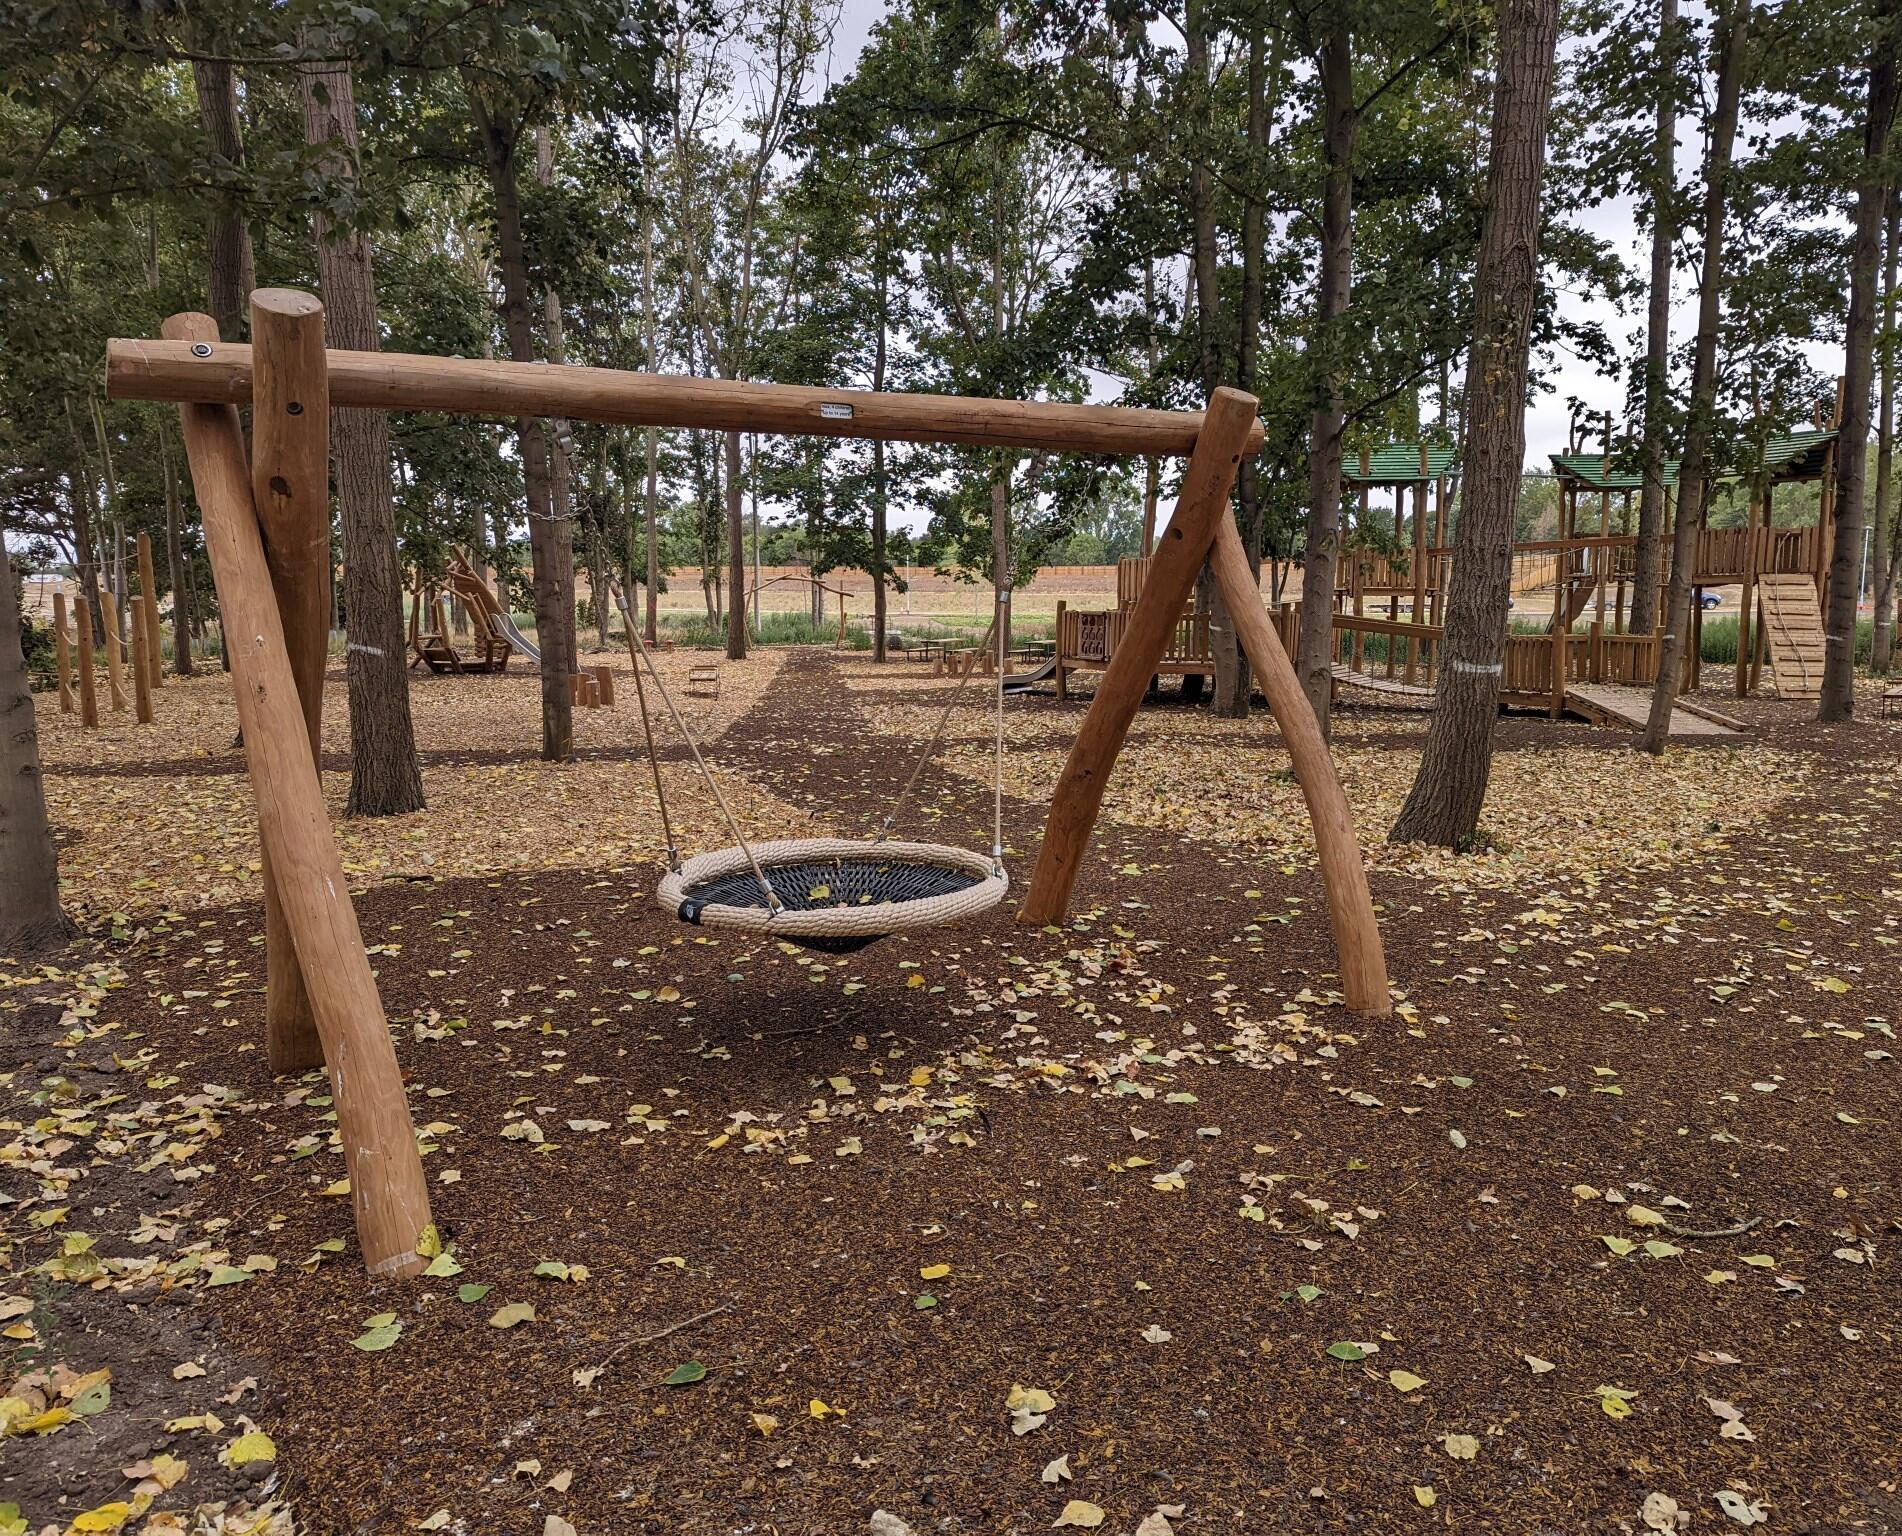 A photograph of a play area within a woodland